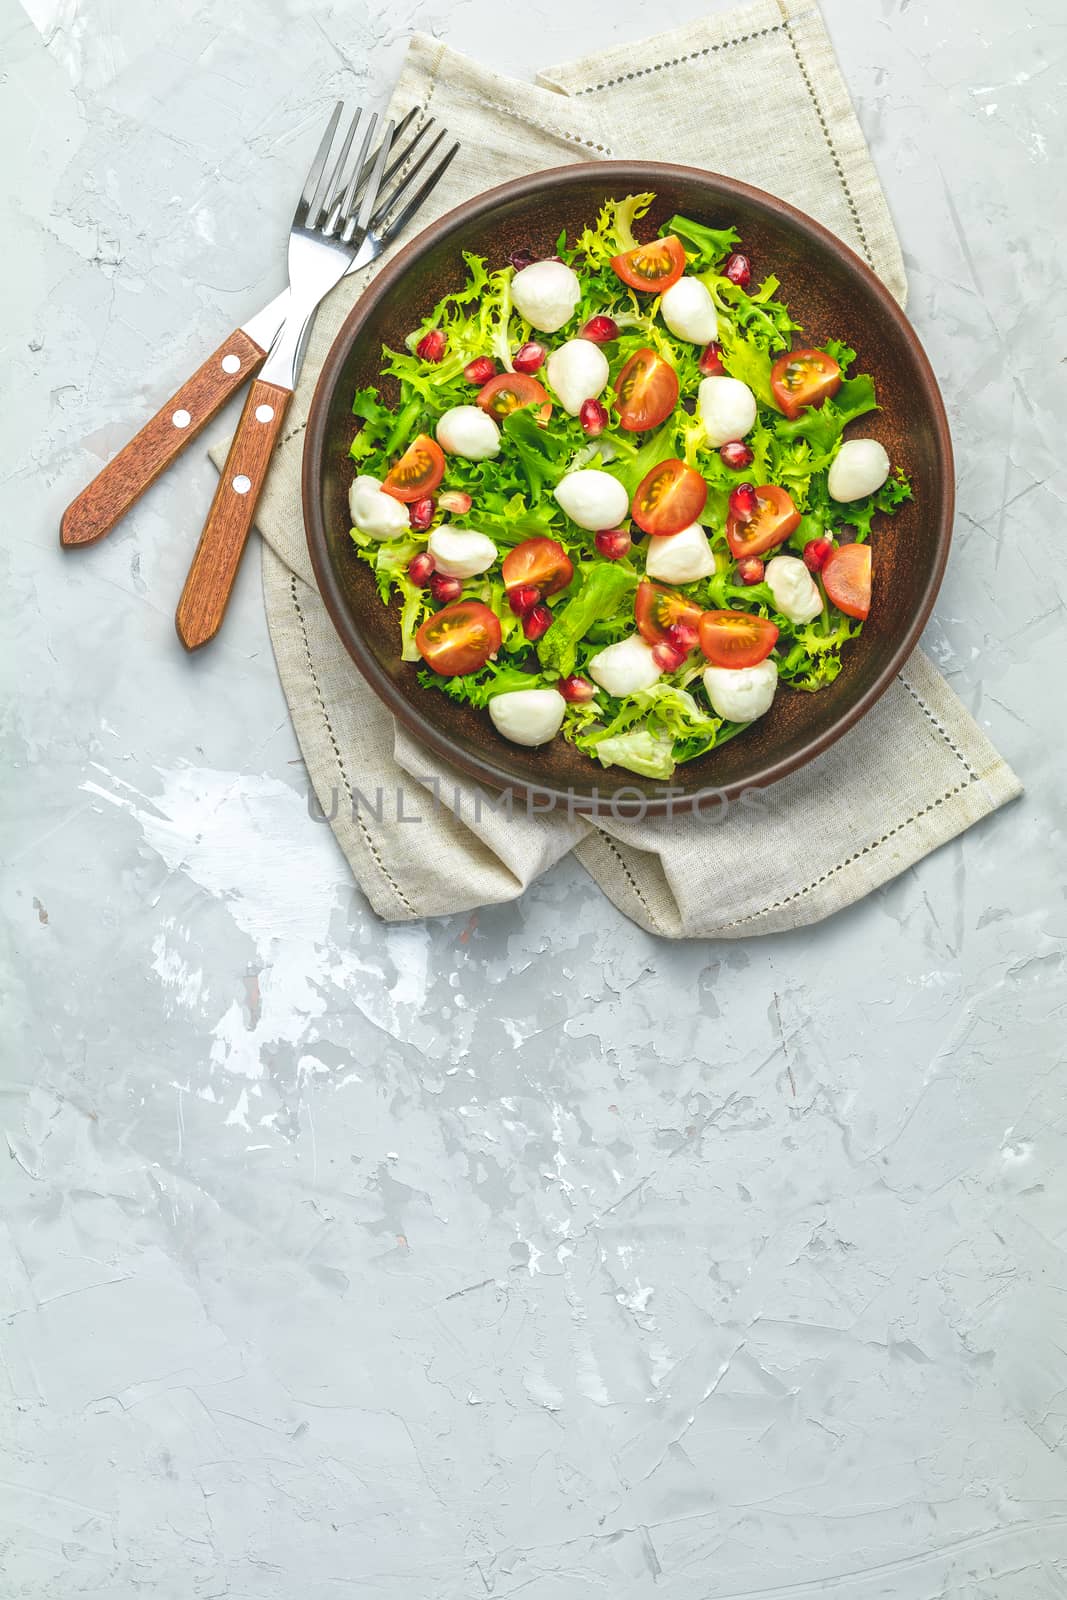 Fresh Cherry Tomato, Mozzarella salad with green lettuce mix served on a brown ceramic plate, healthy food, light gray stone concrete surface, top view, copy space.